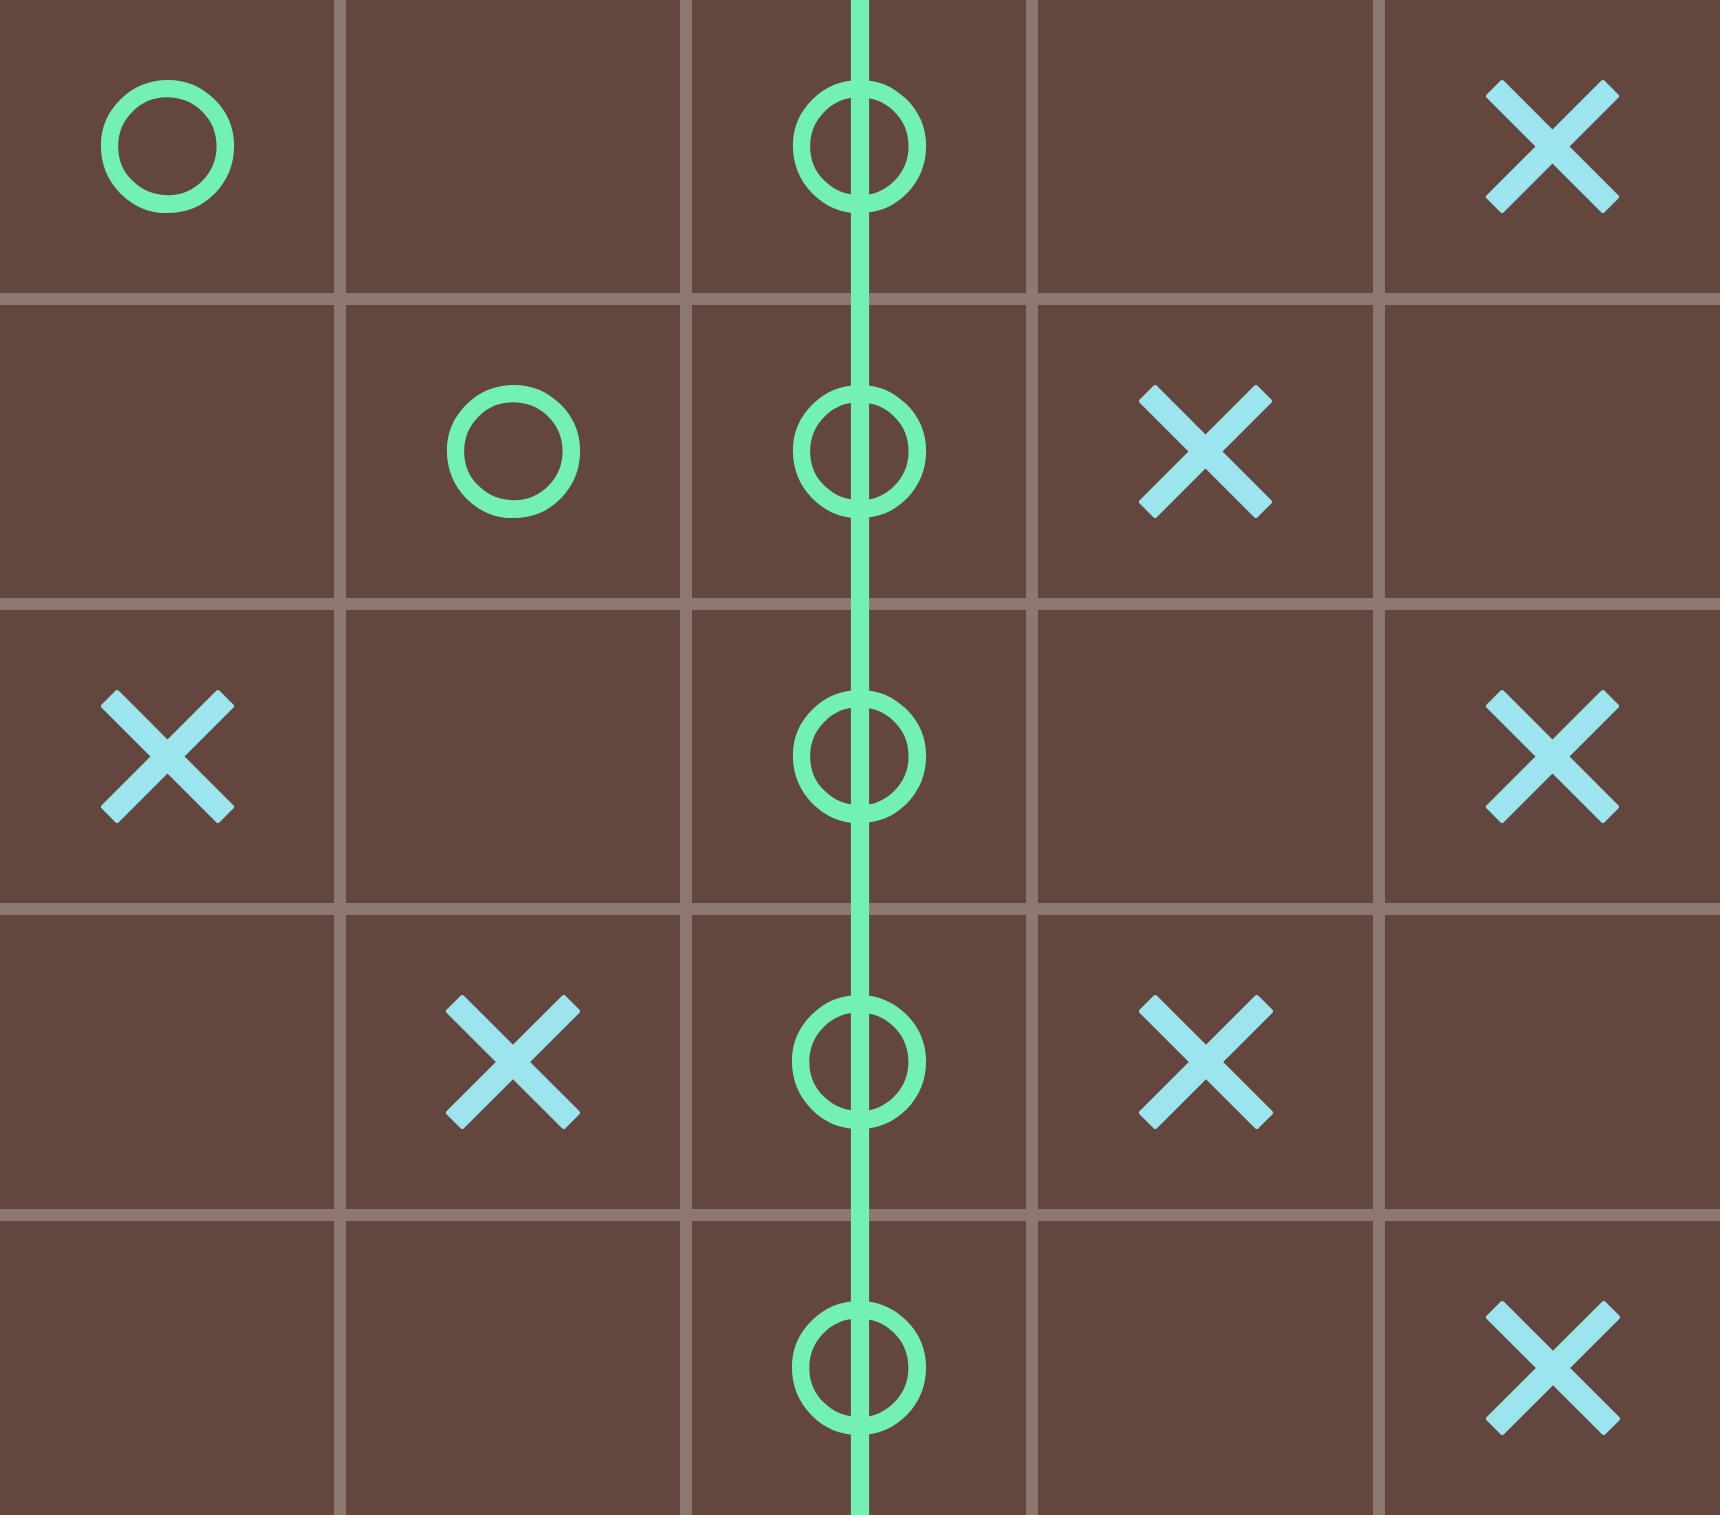 The Impossible Tic Tac Toe Game